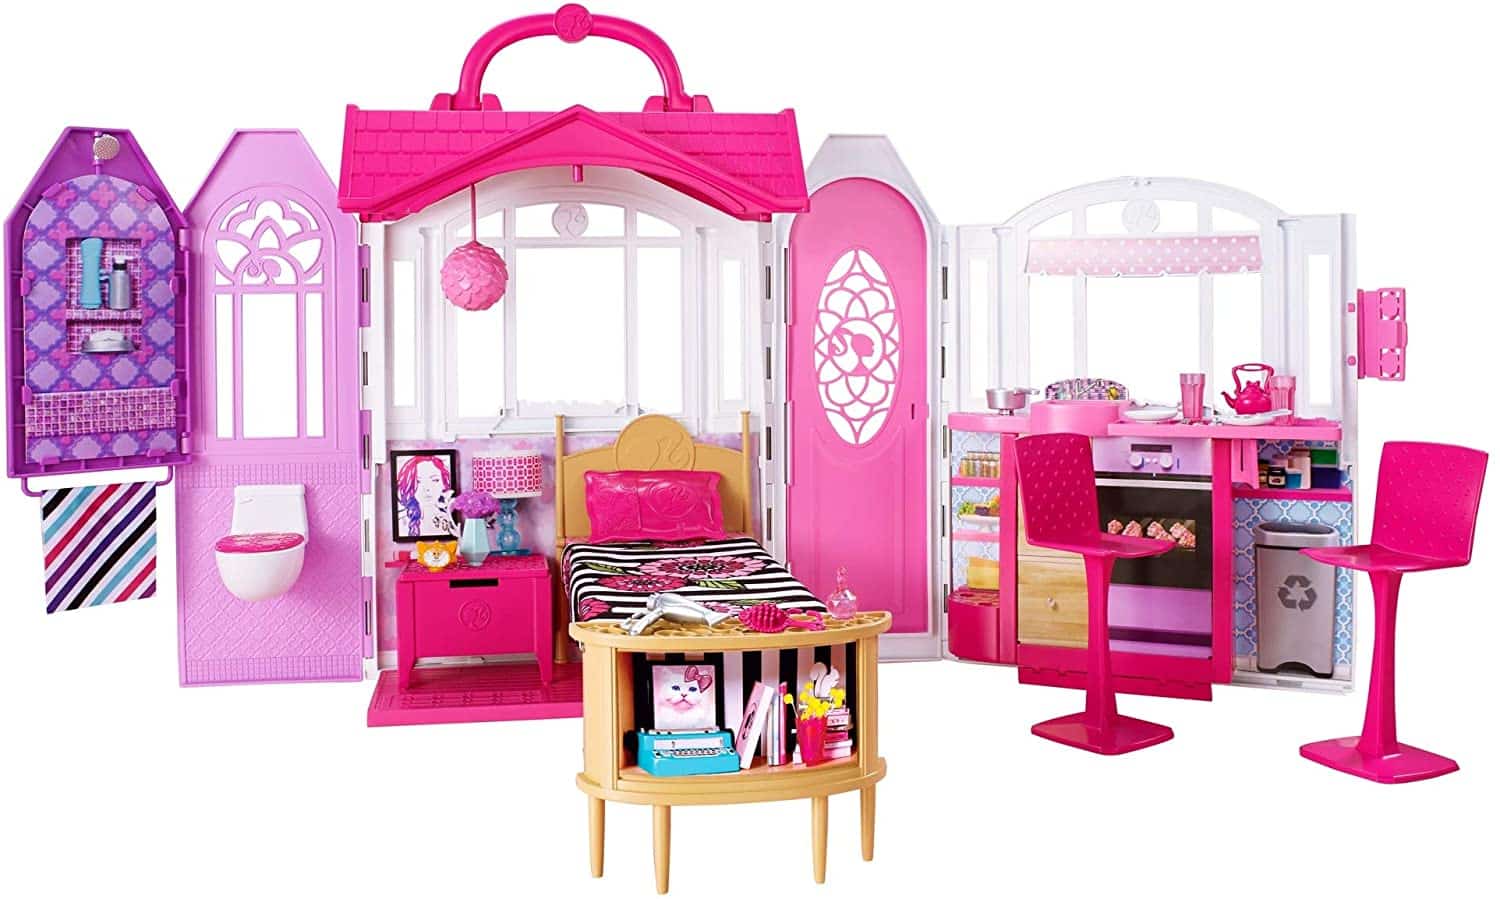 gifts-for-4-year-old-girls-portable-playhouse